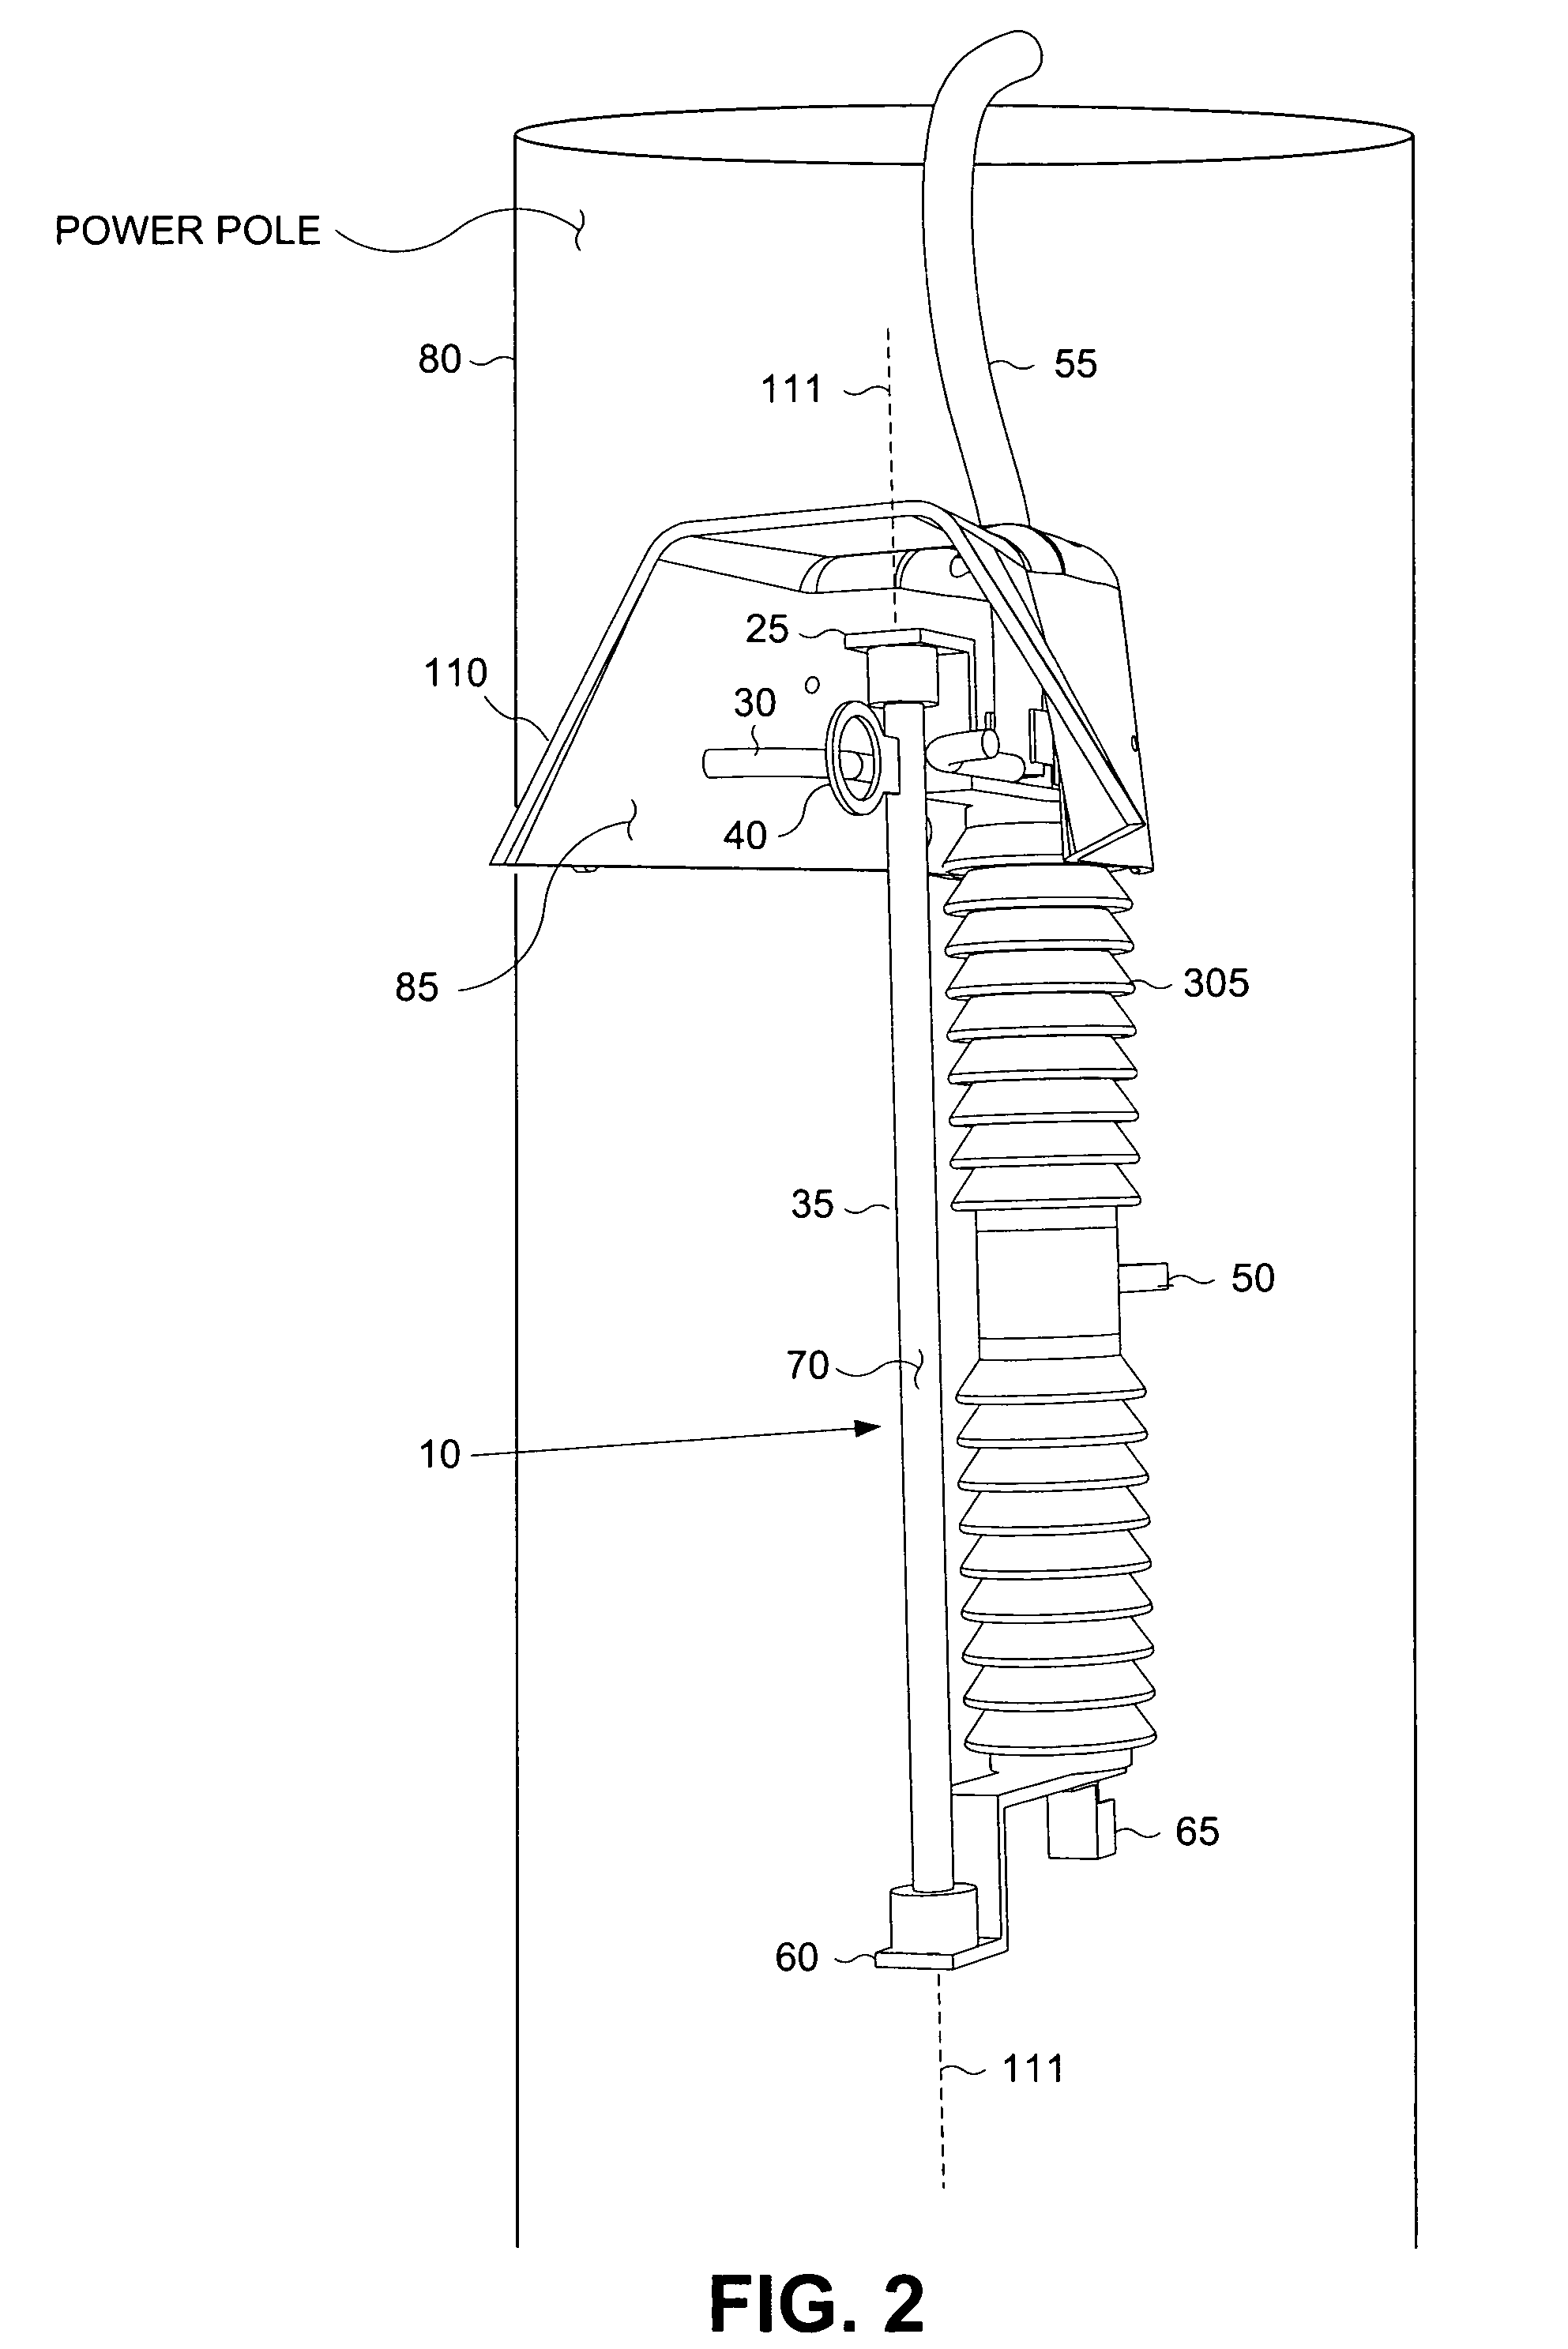 Method and apparatus for protection of wildlife from contact with power phase cutout mechanism